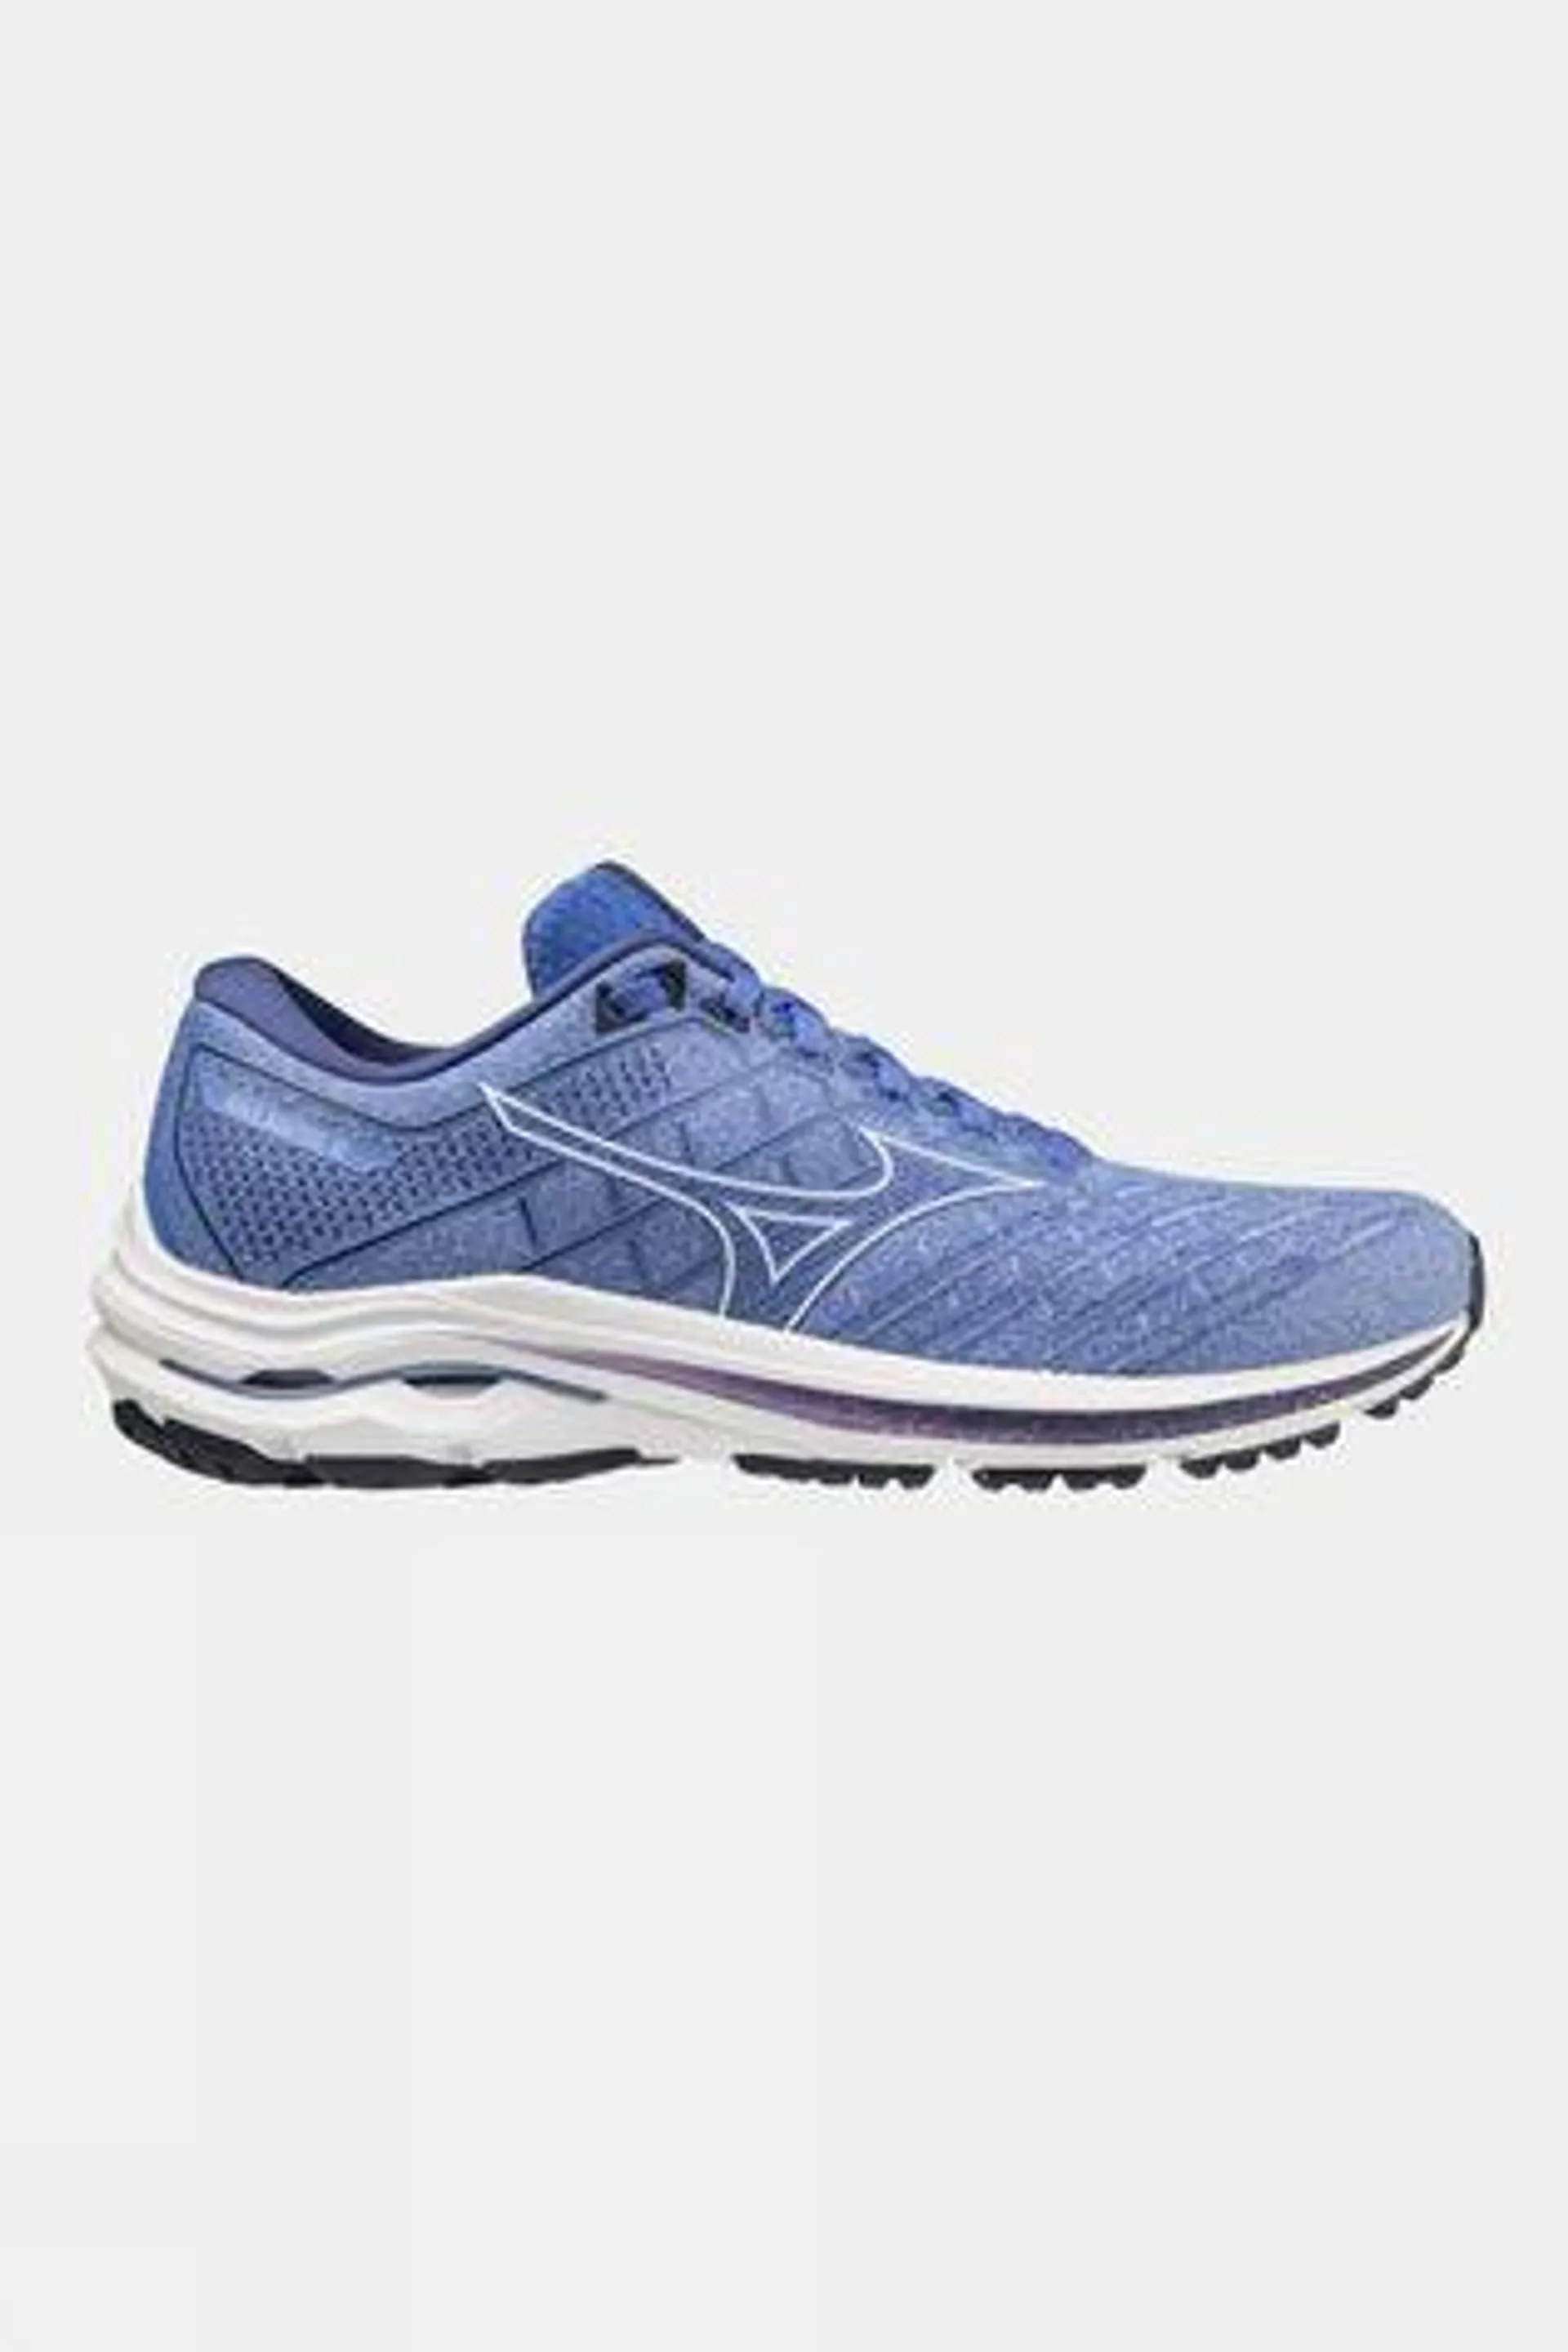 Womens Wave Inspire 18 Shoes